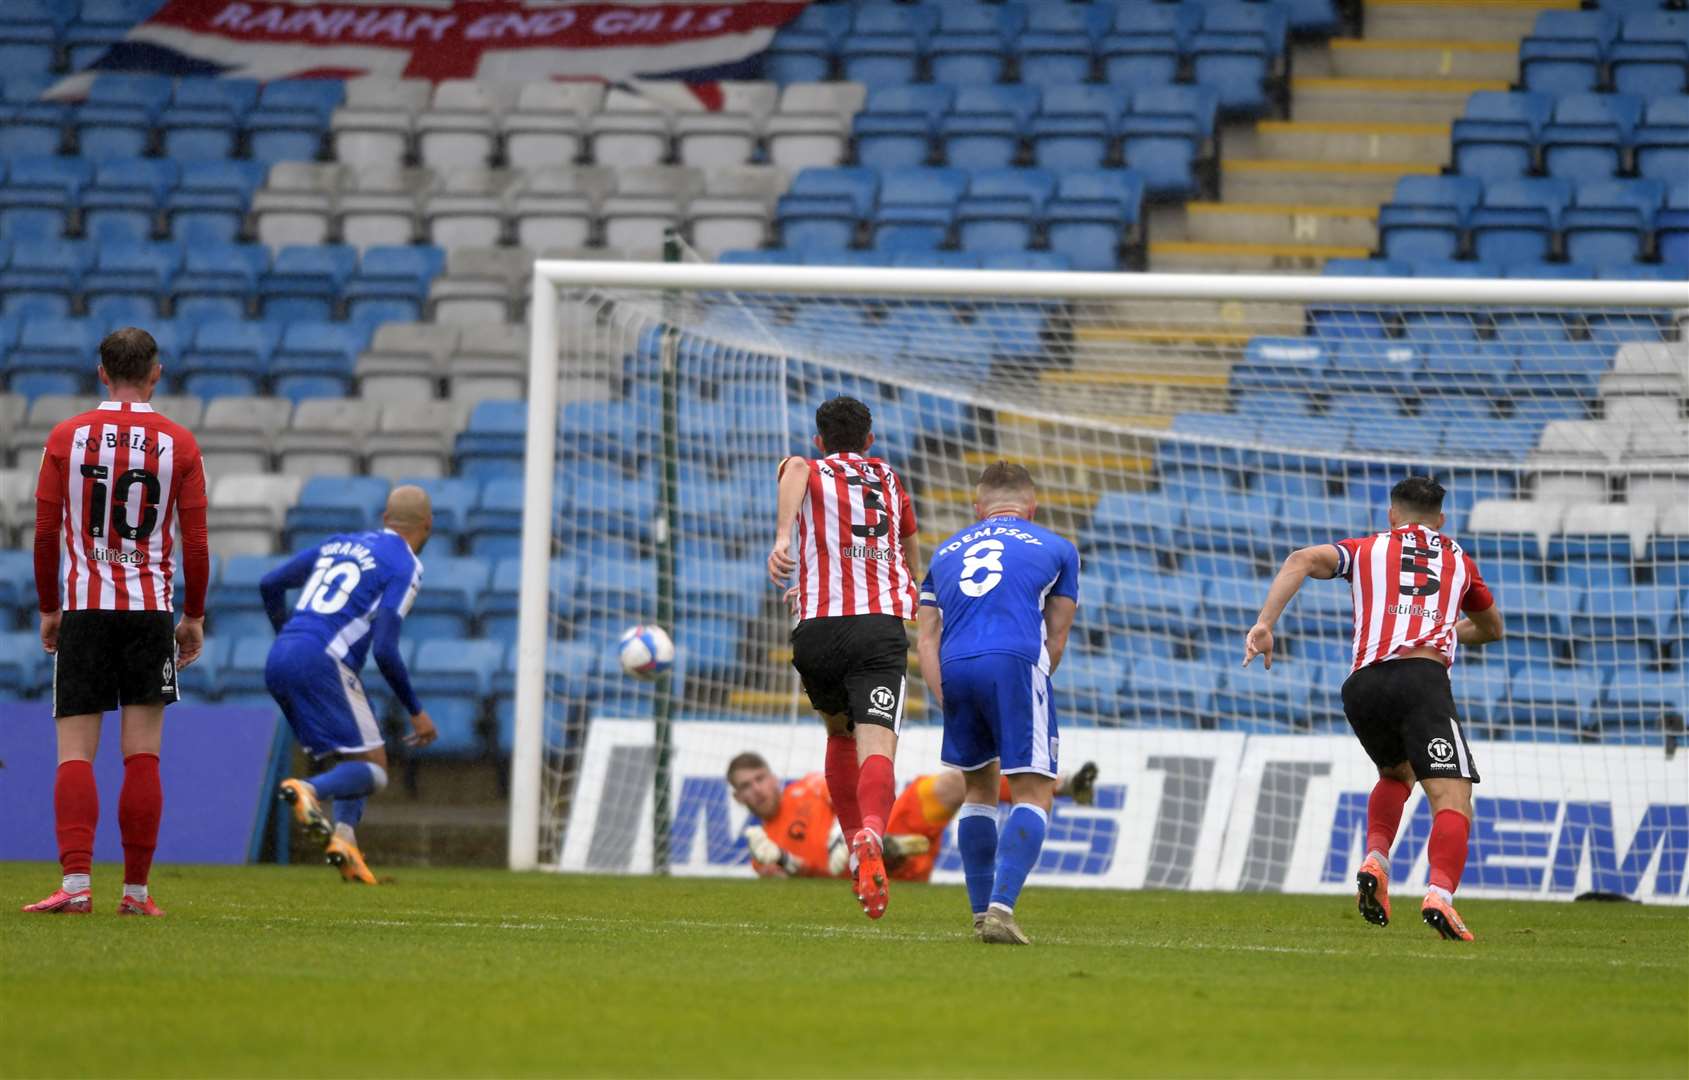 Jordan Graham's penalty kick is saved Picture: Barry Goodwin